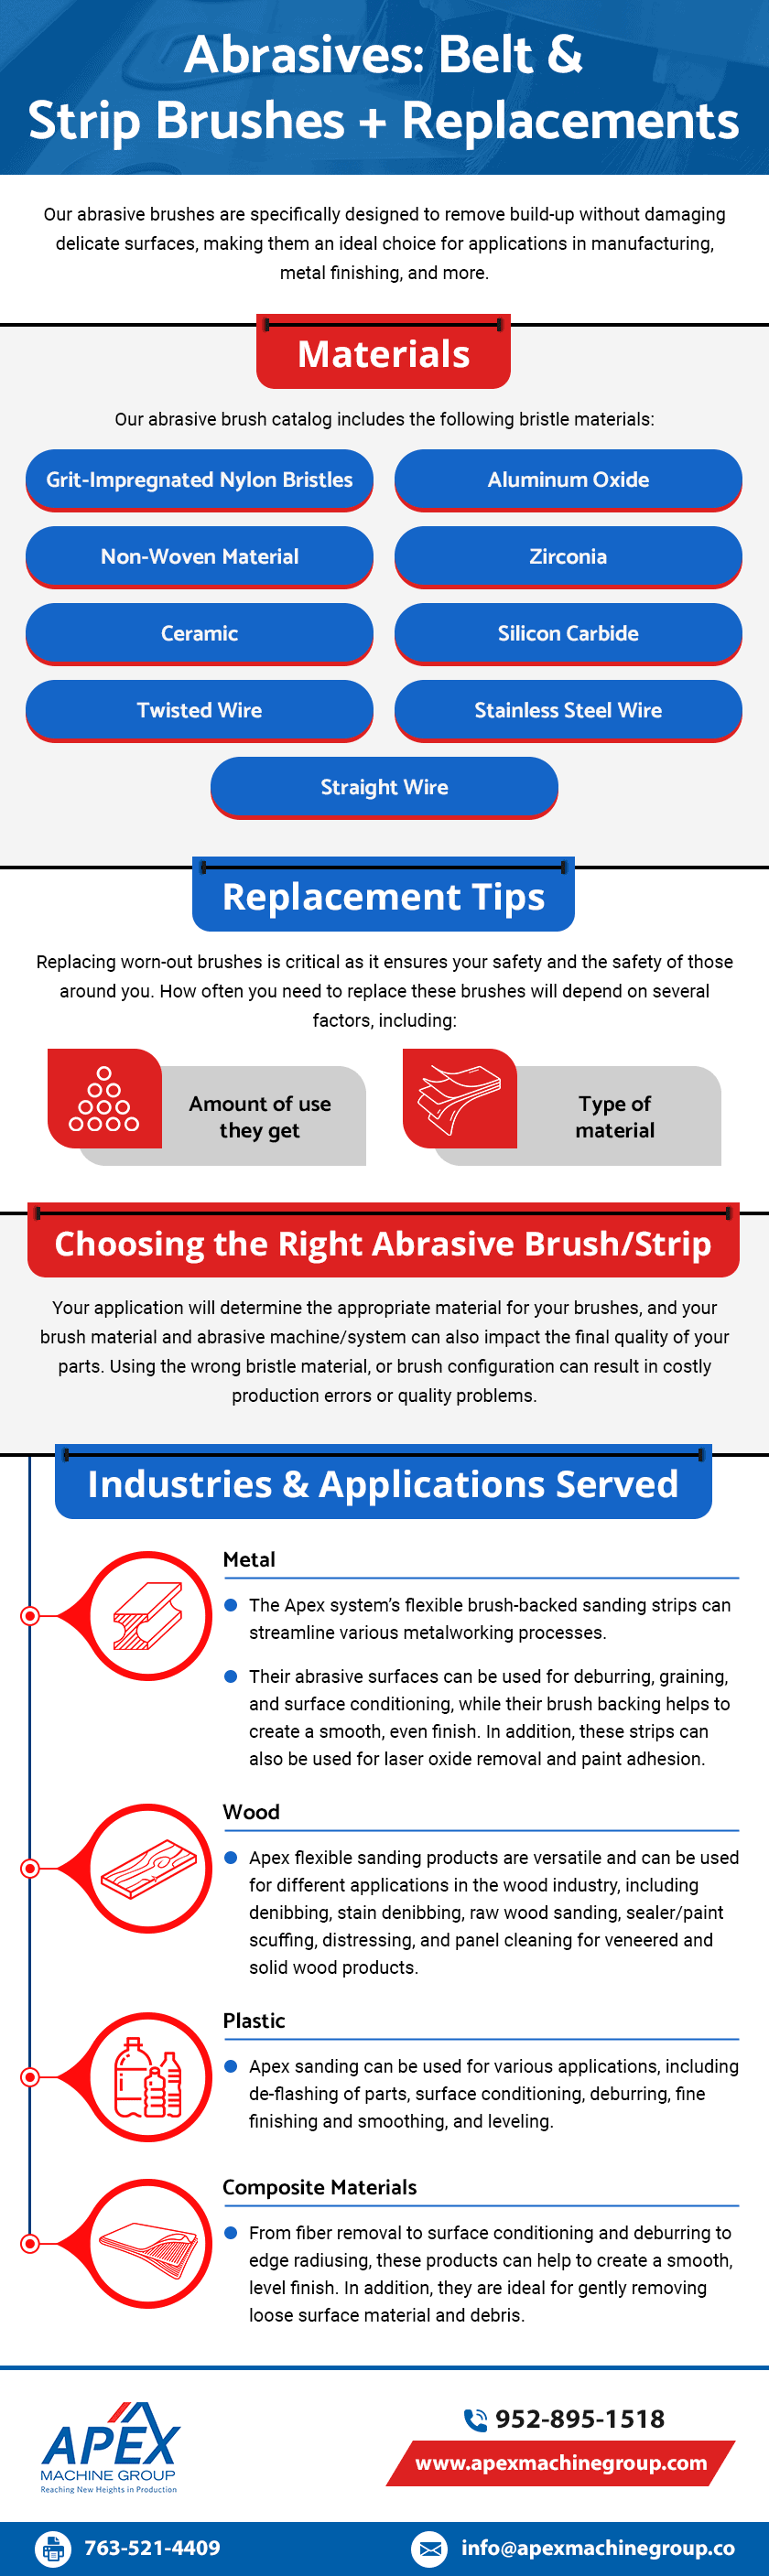 Abrasives Belt & Strip Brushes + Replacements